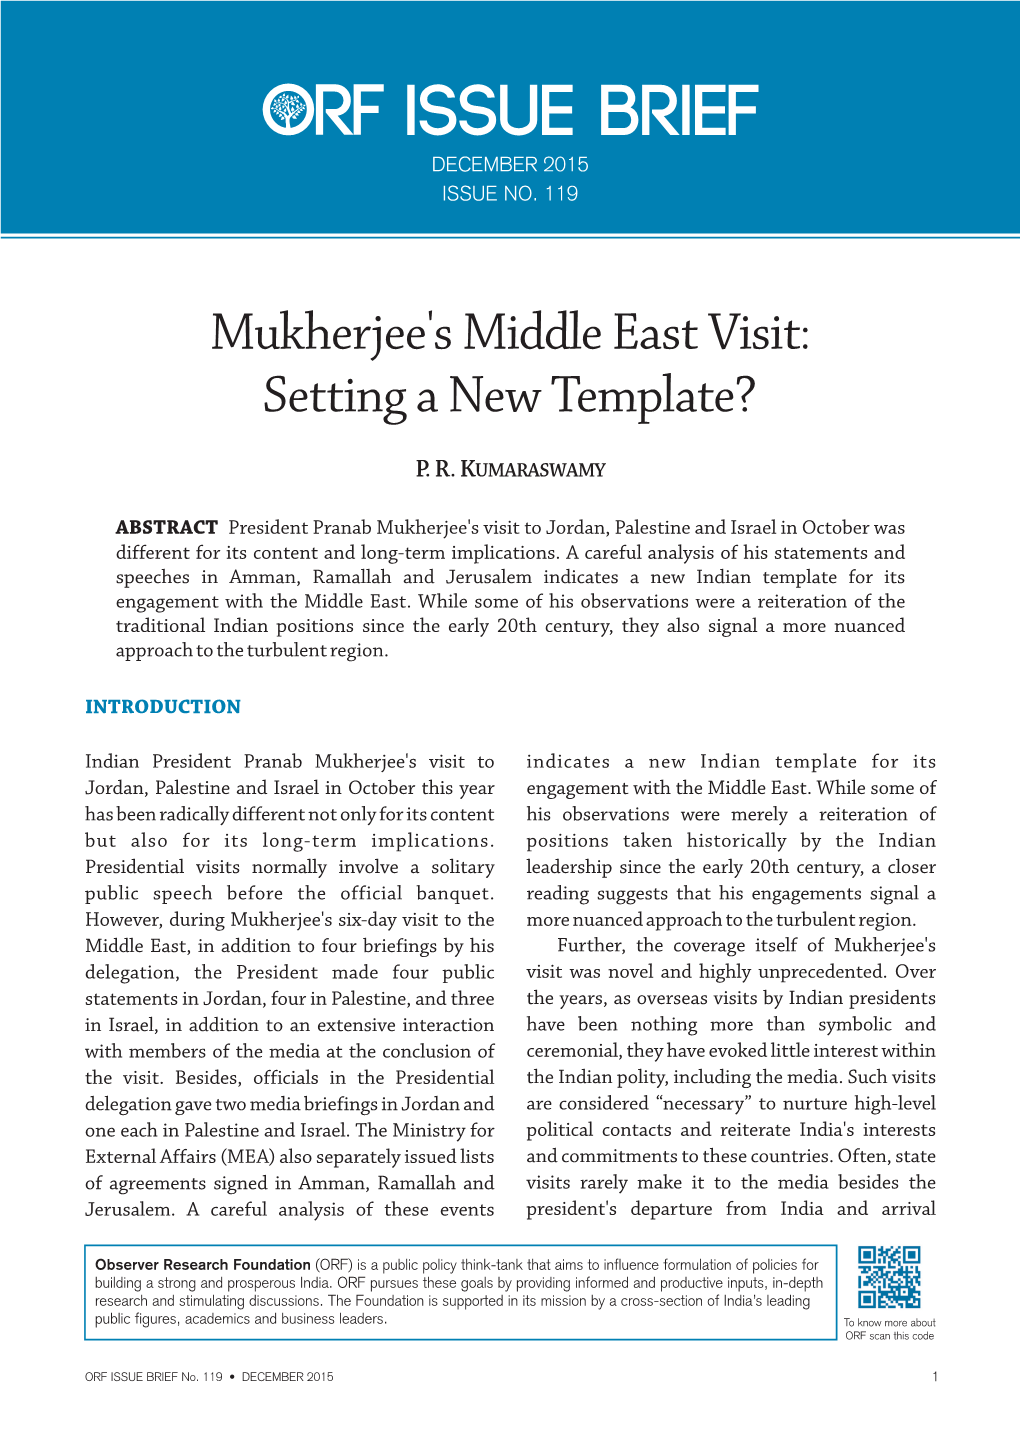 Mukherjee's Middle East Visit: Setting a New Template?